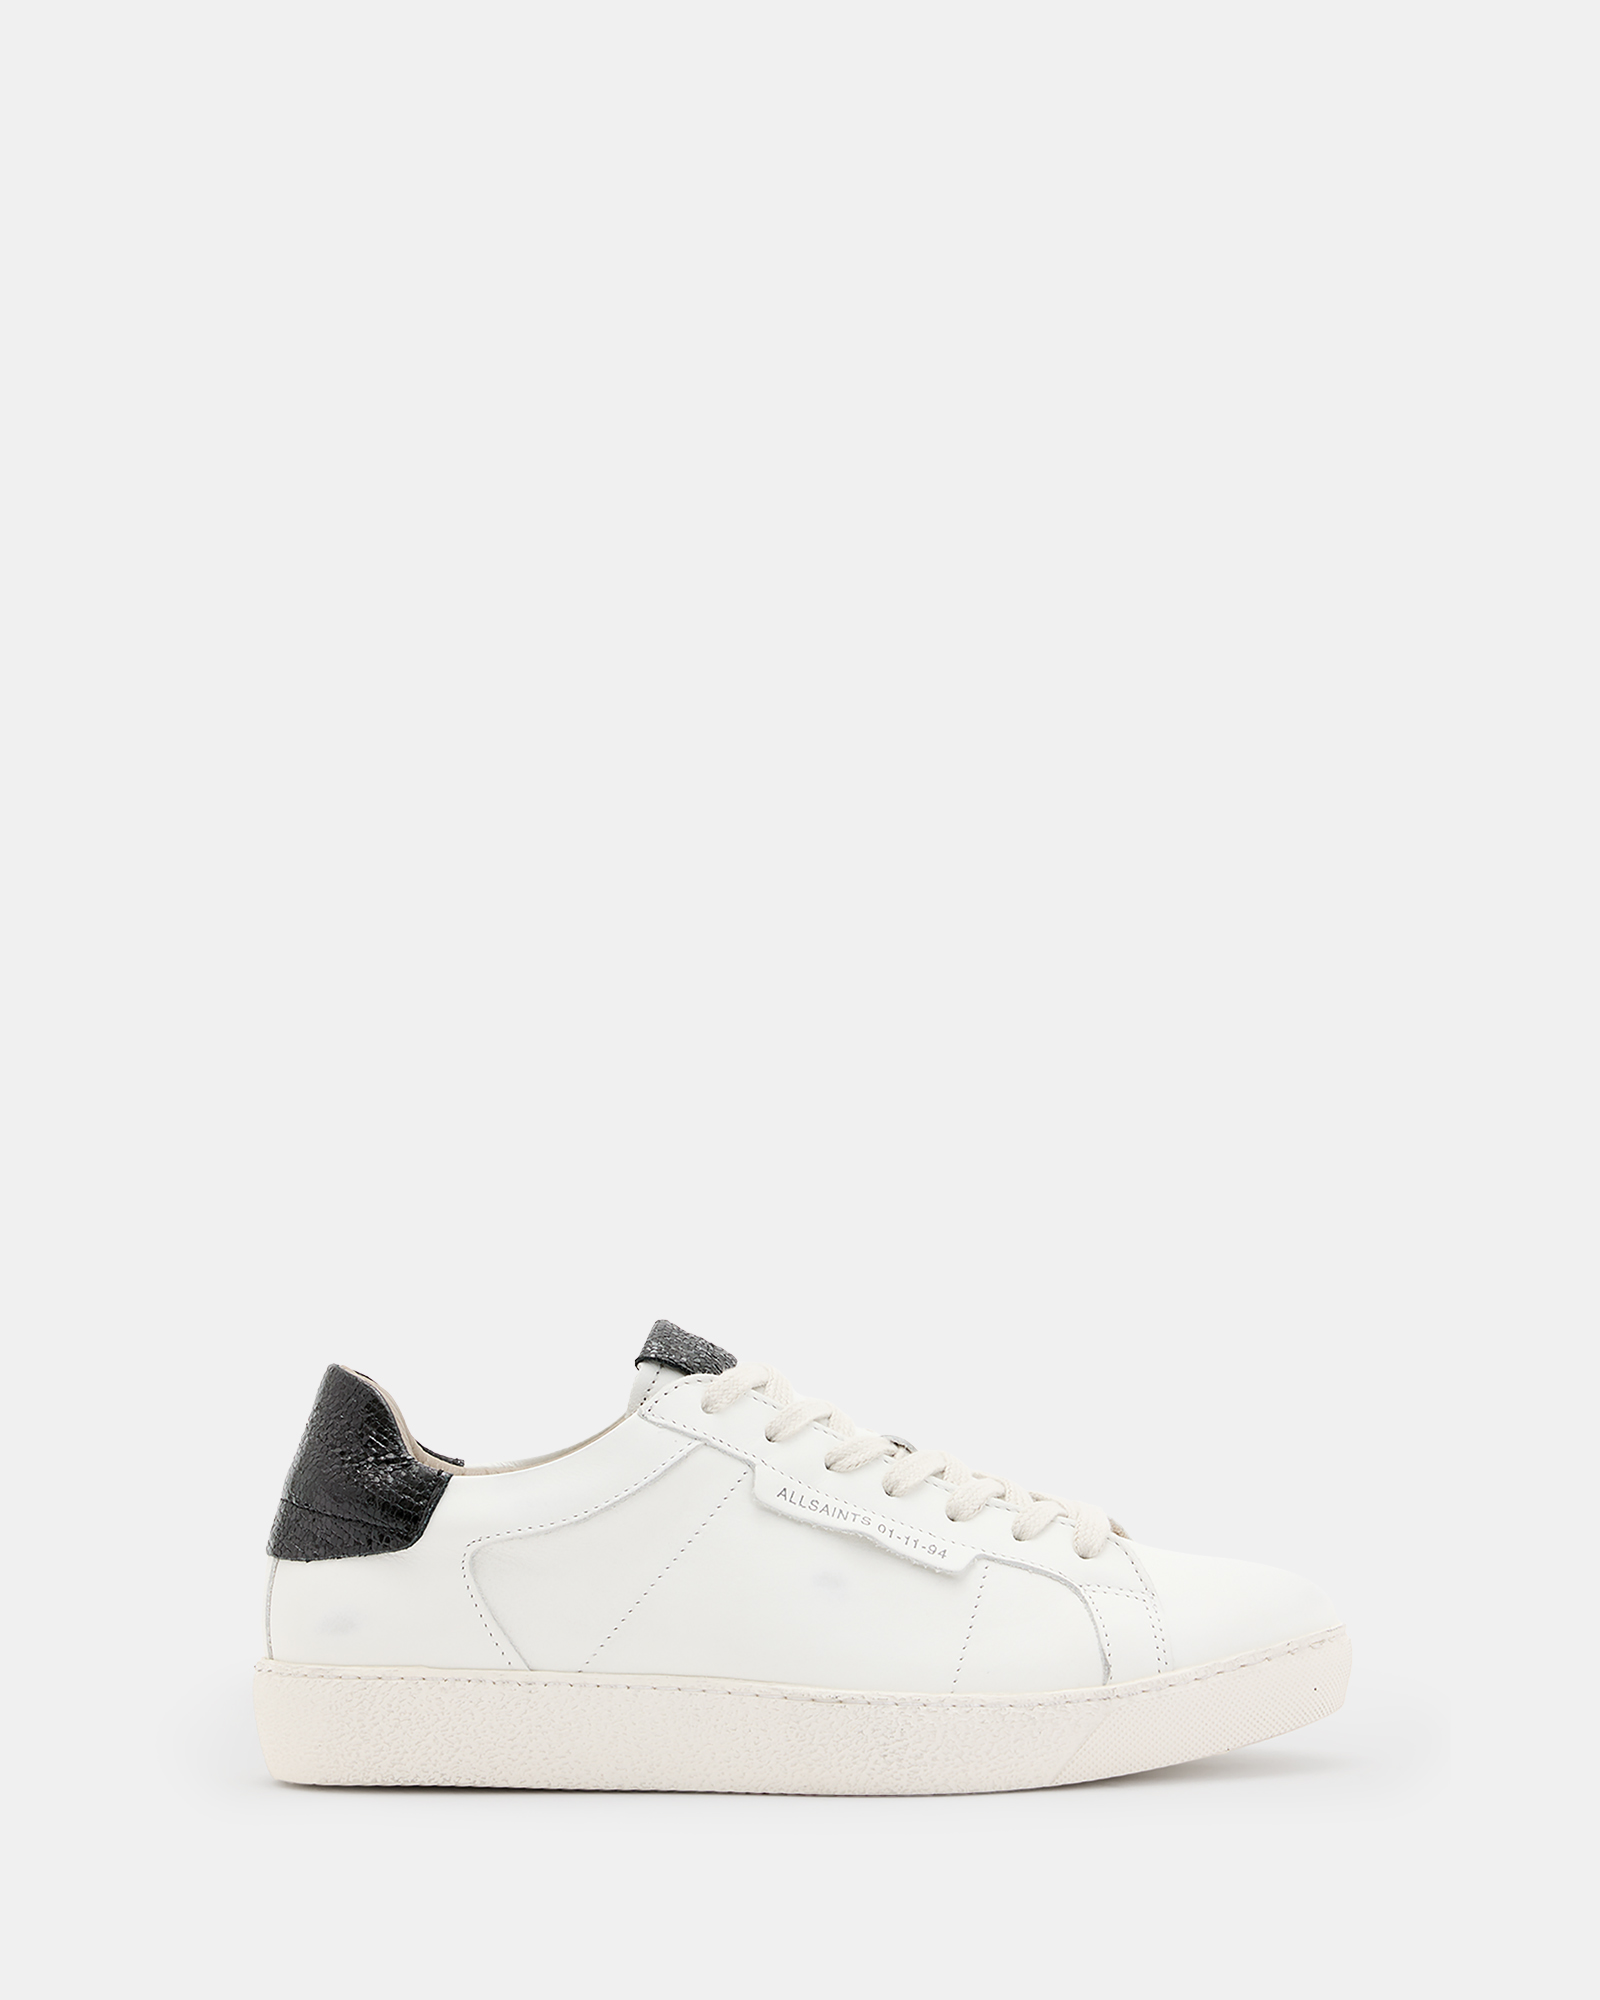 AllSaints Sheer Round Toe Leather Trainers,, WHITE/METALLIC